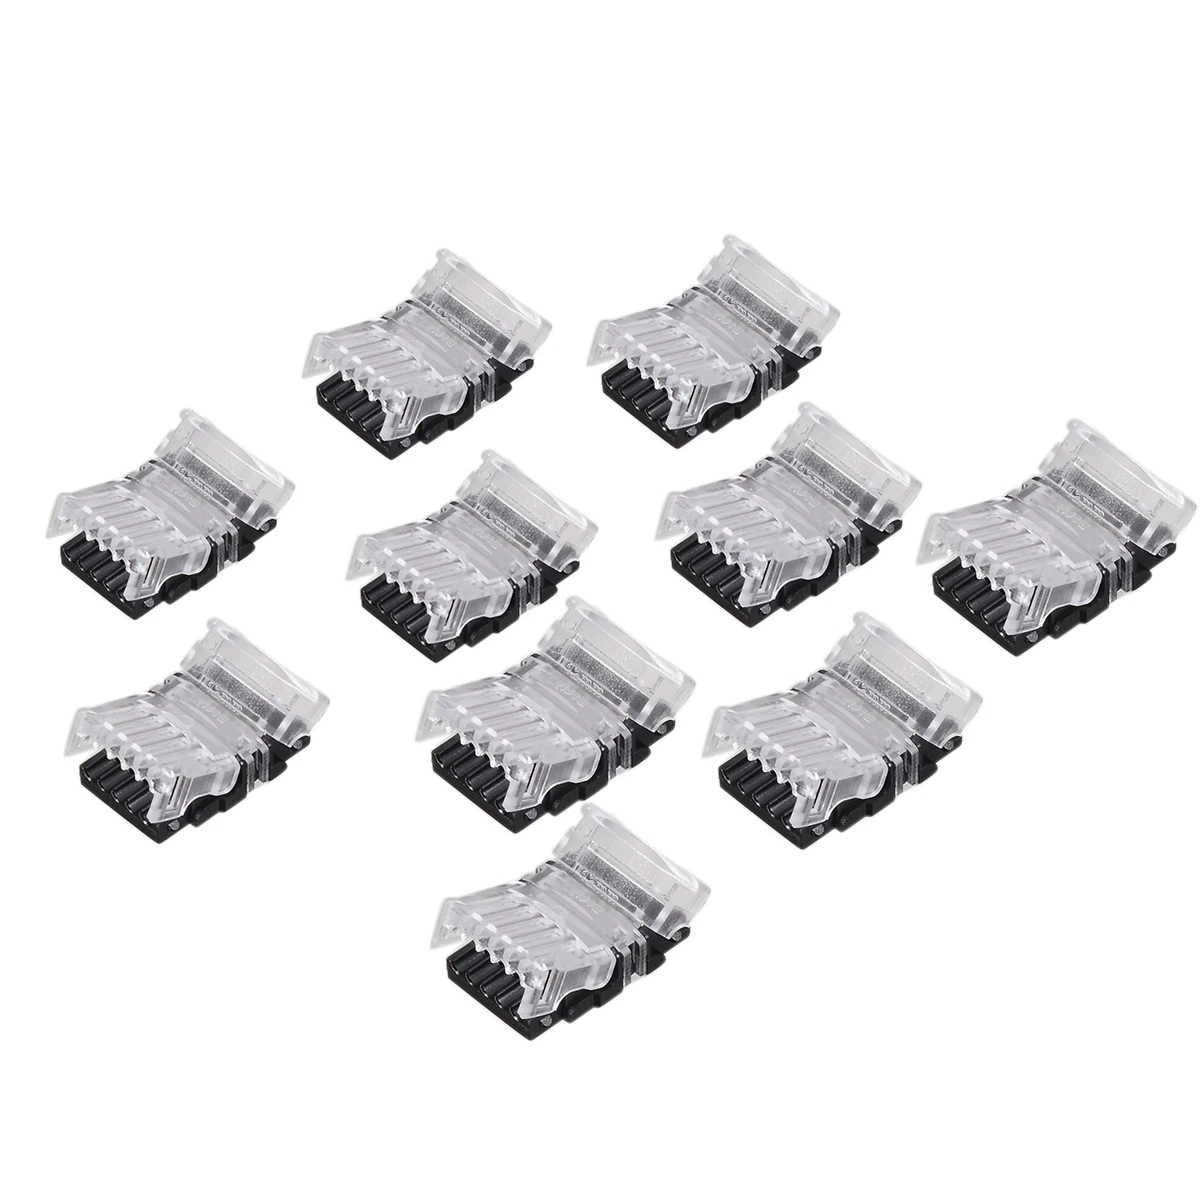 10pcs 5 pin LED Strip Connector Waterproof IP65 5050 LED Light Quick Connectors Mayitr Lighting Accessories